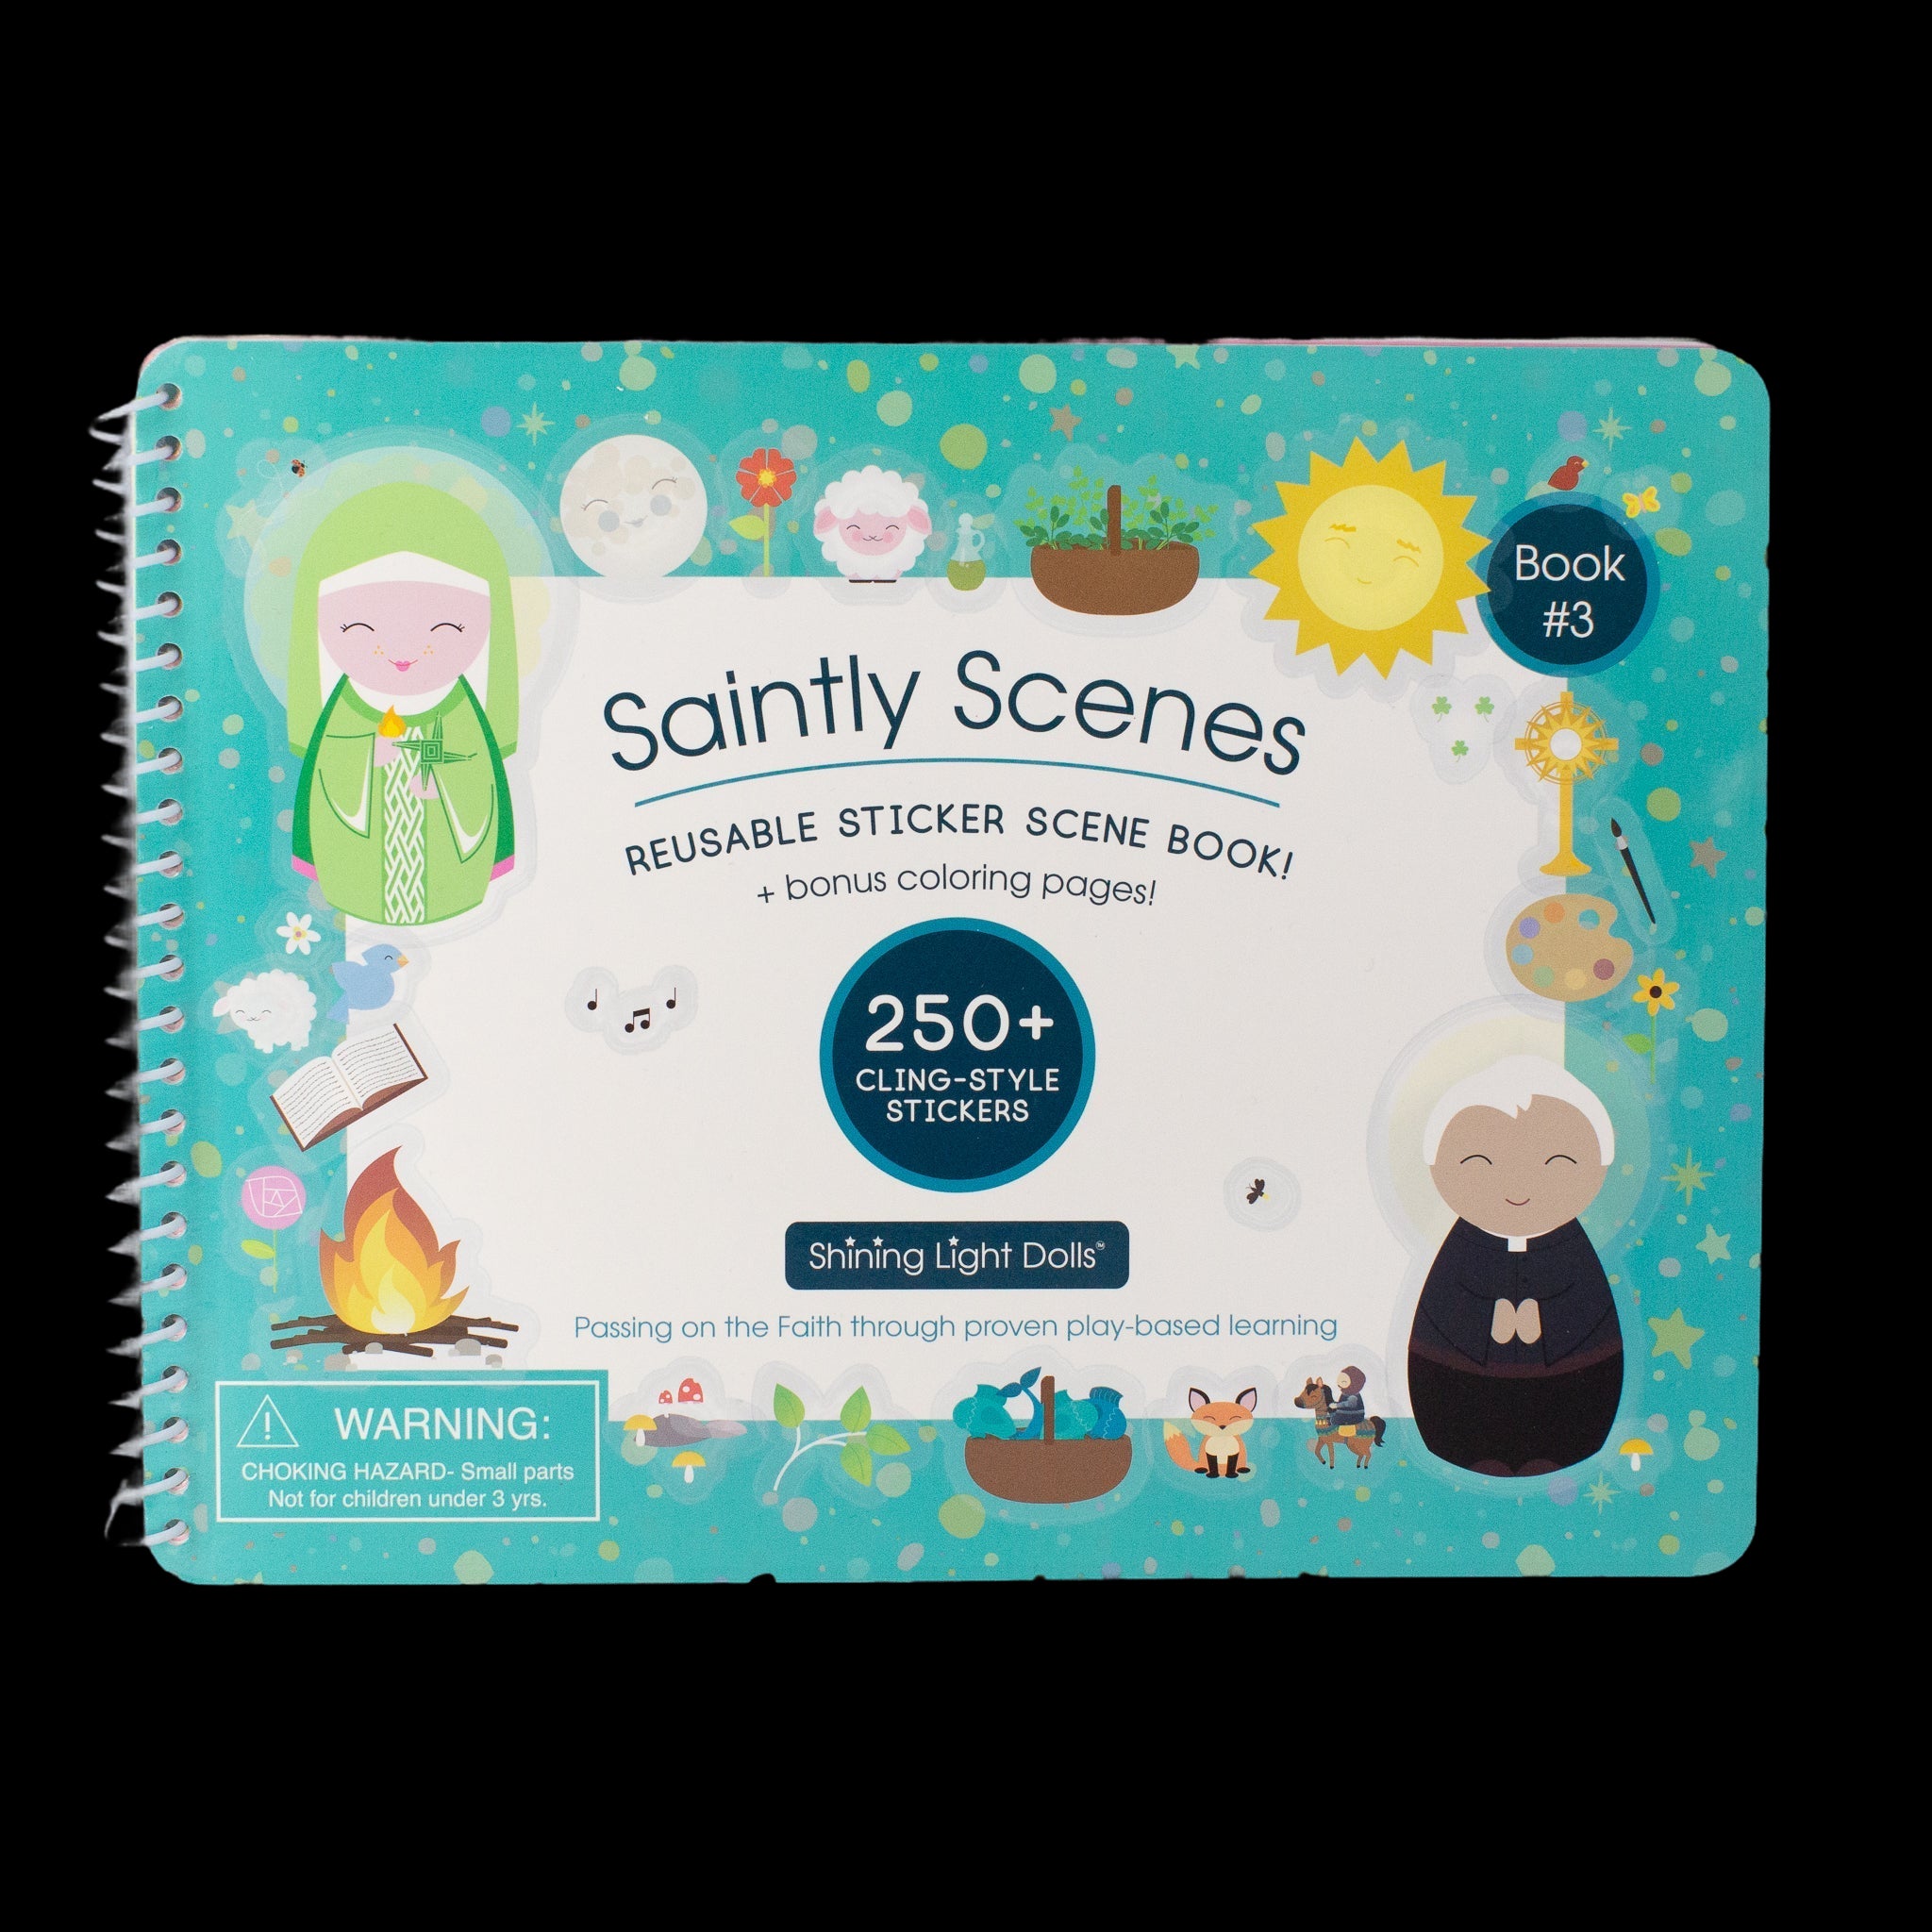 Saintly Scenes Book #3 - Reusable Sticker Scene And Coloring Book